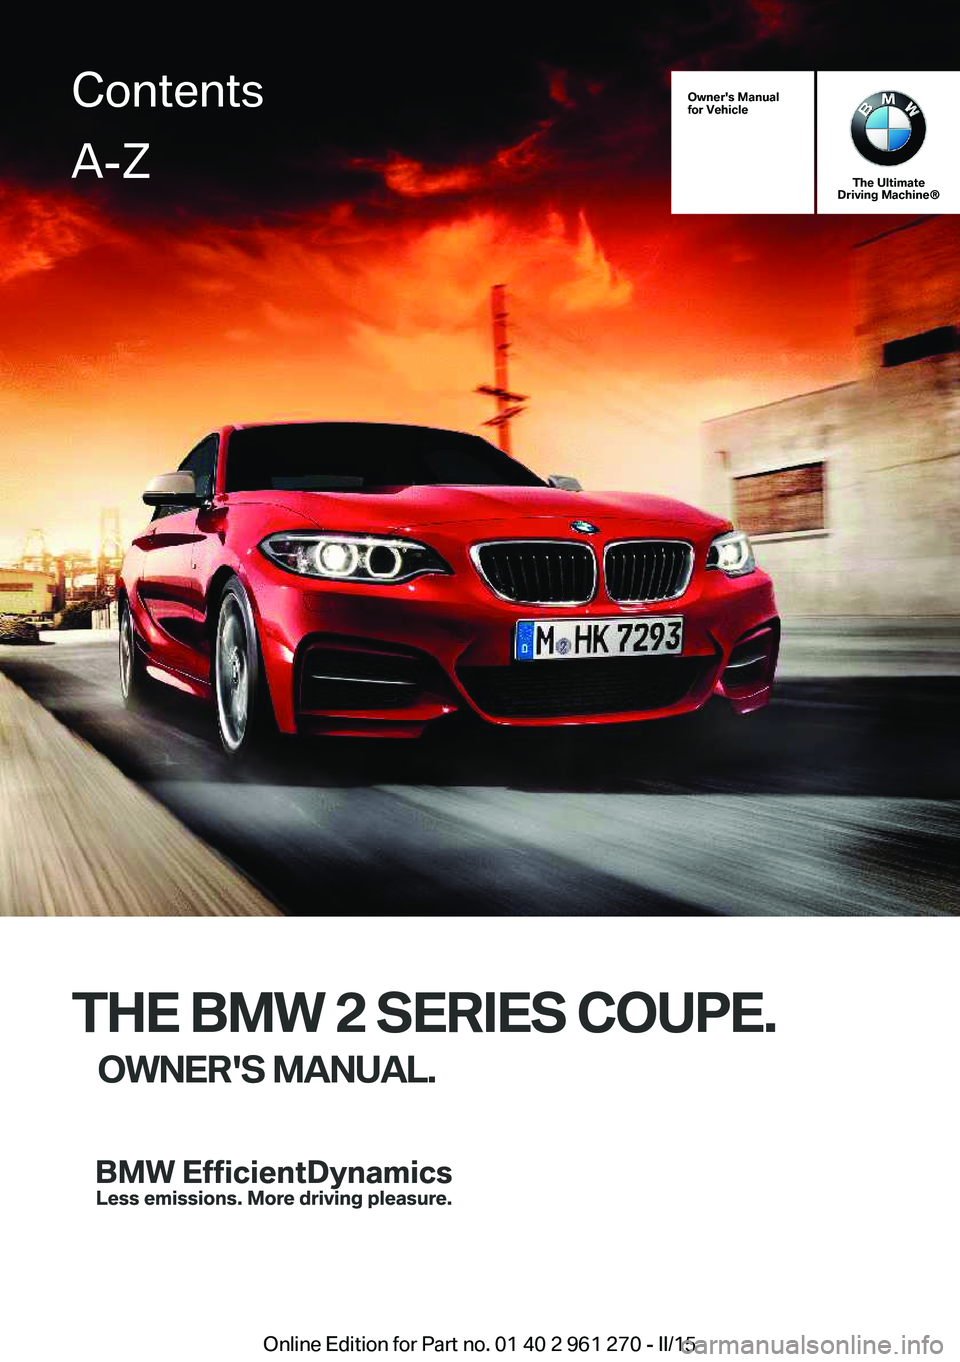 BMW M235I XDRIVE COUPE 2015  Owners Manual Owner's Manual
for Vehicle
The Ultimate
Driving Machine®
THE BMW 2 SERIES COUPE.
OWNER'S MANUAL.
ContentsA-Z
Online Edition for Part no. 01 40 2 961 270 - II/15   